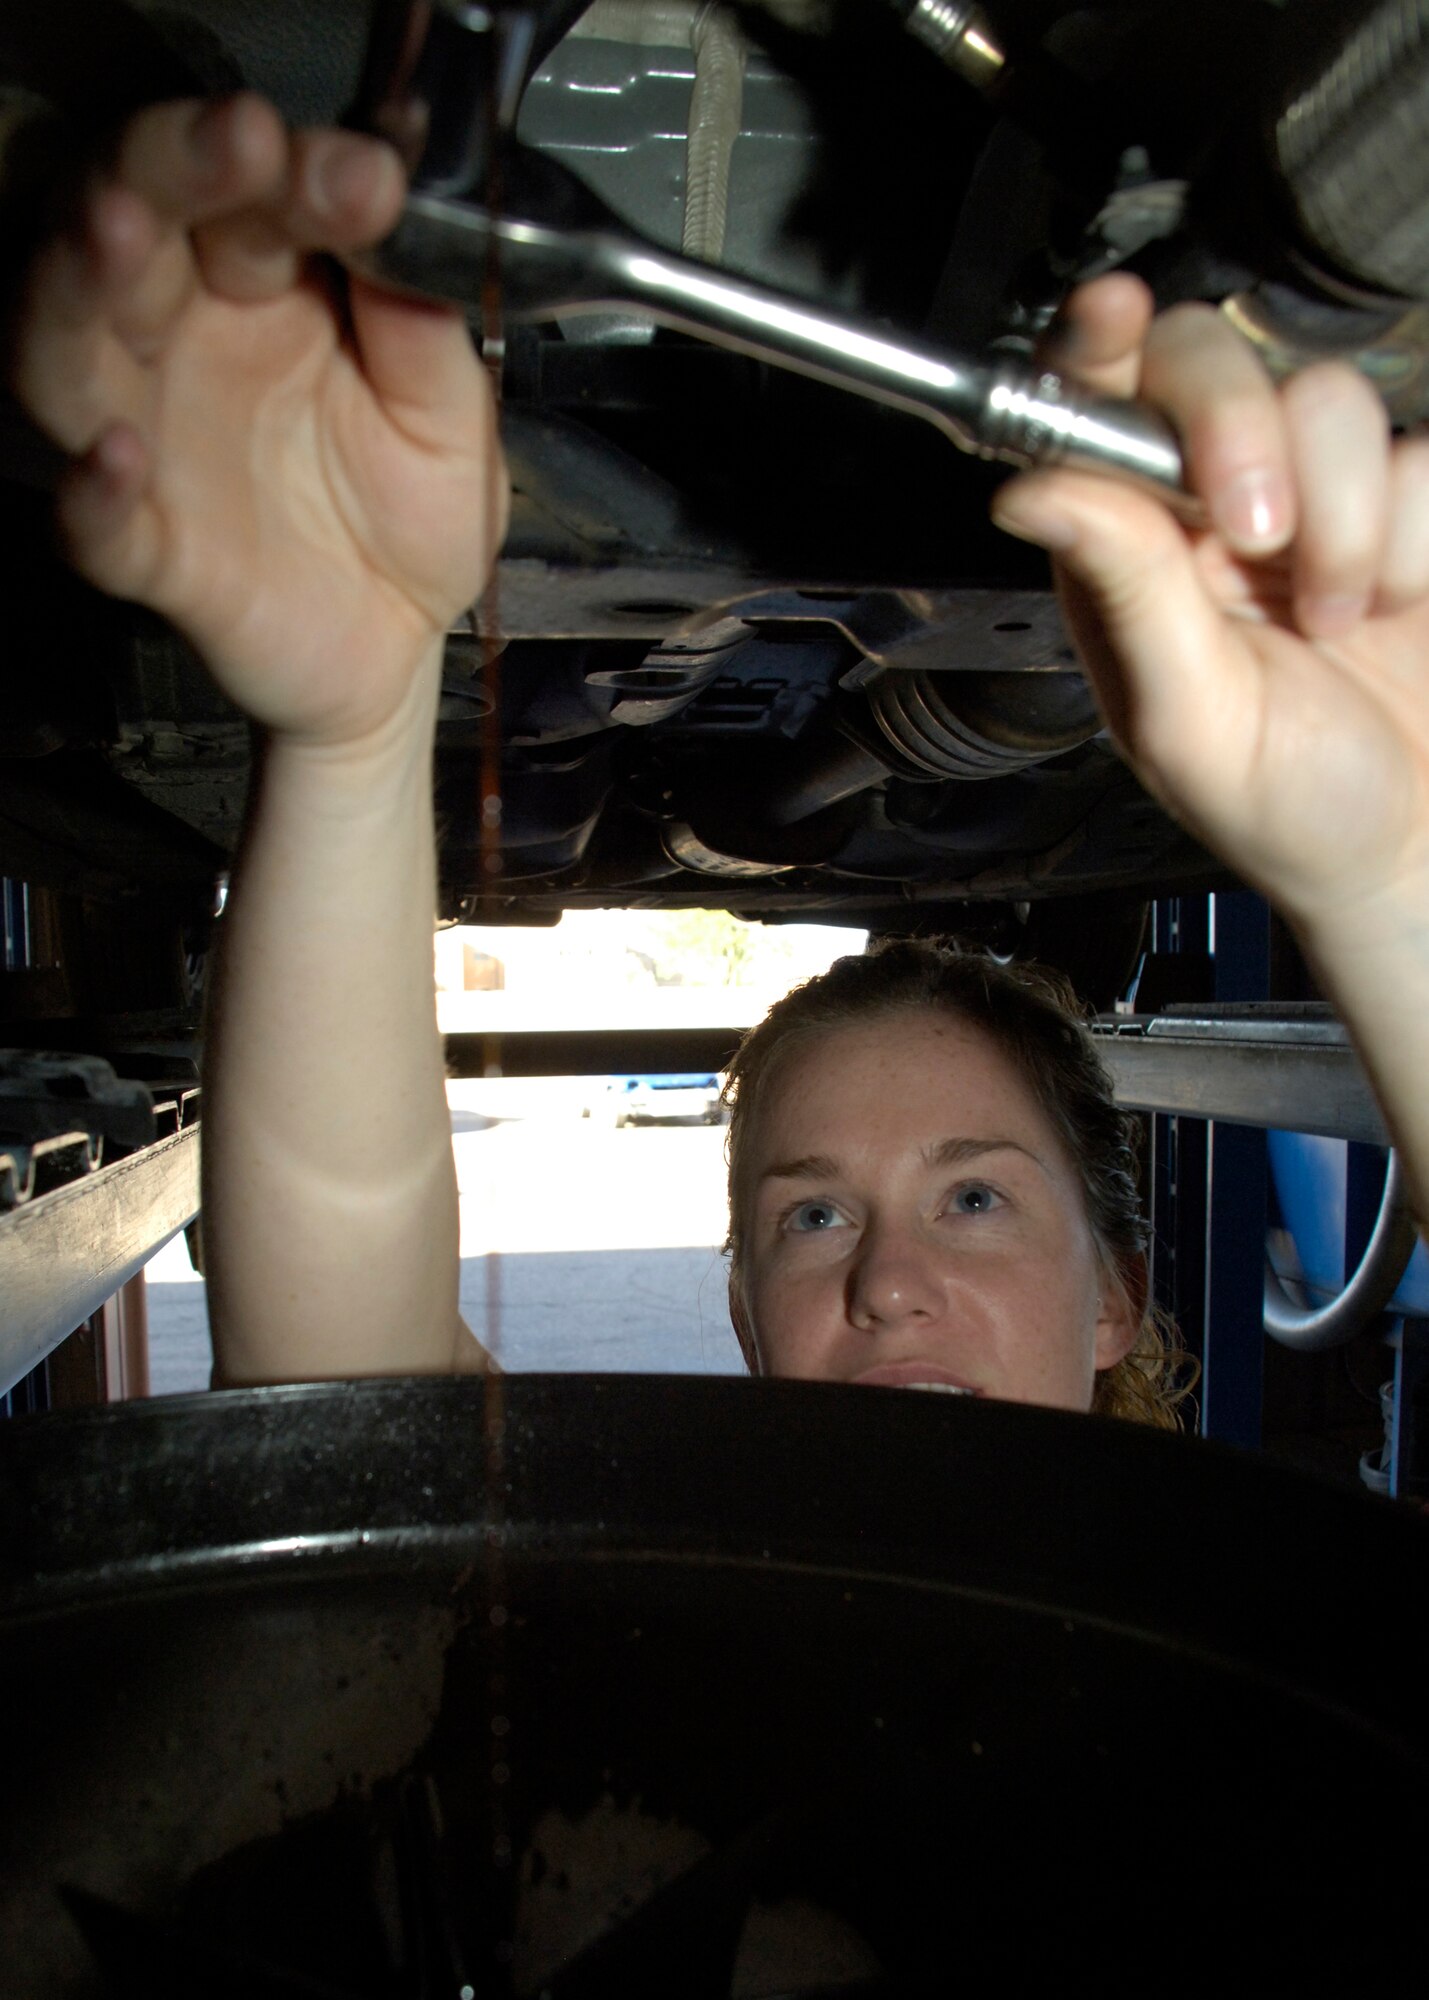 Airman 1st Class Krista Lawrence, 49th Civil Engineer Squadron, drains the oil in her vehicle at the Auto Hobby Center on Holloman Air Force Base, N.M., May 22. The Auto Hobby Center offers tool and equipment for your use. (U.S. Air Force photo/Airman 1st Class Michael Means)